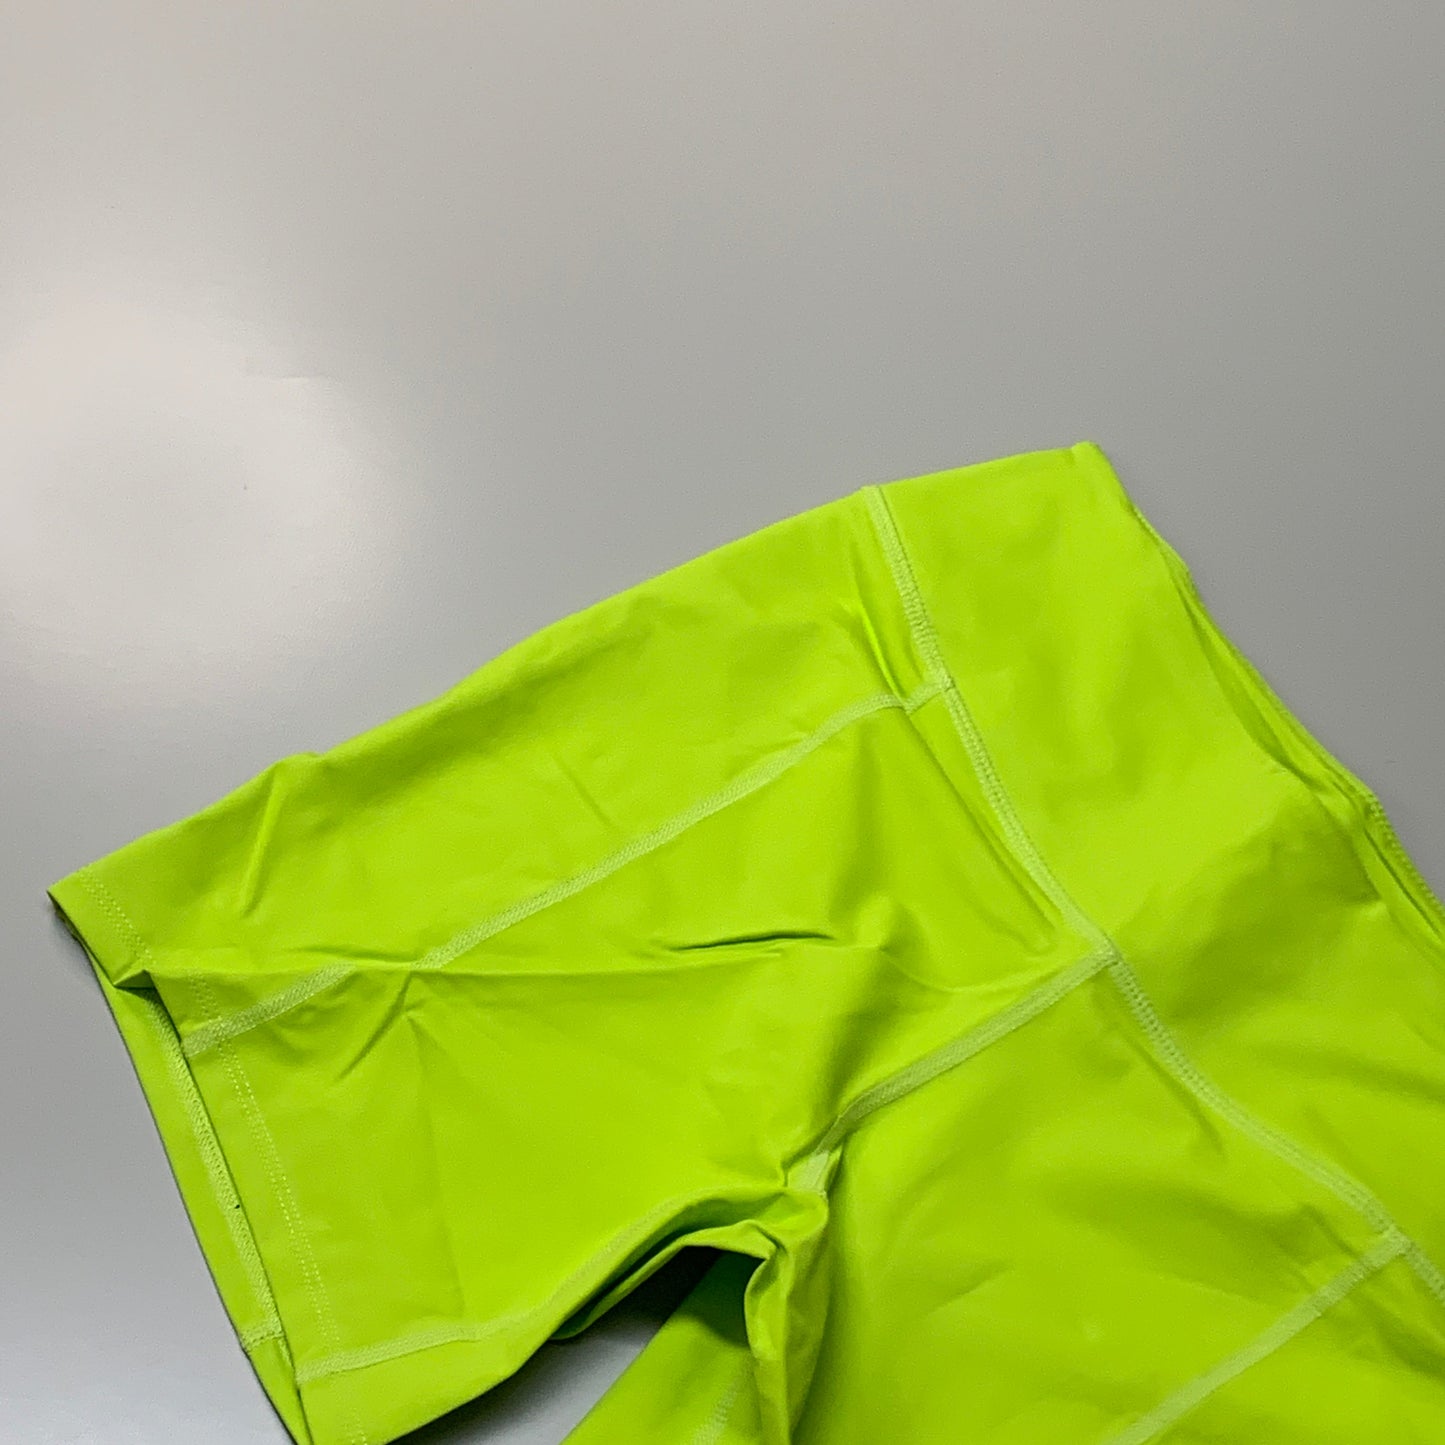 NATHAN Interval 6" Inseam Bike Short Women's Bright Lime Size S NS51520-50119-S